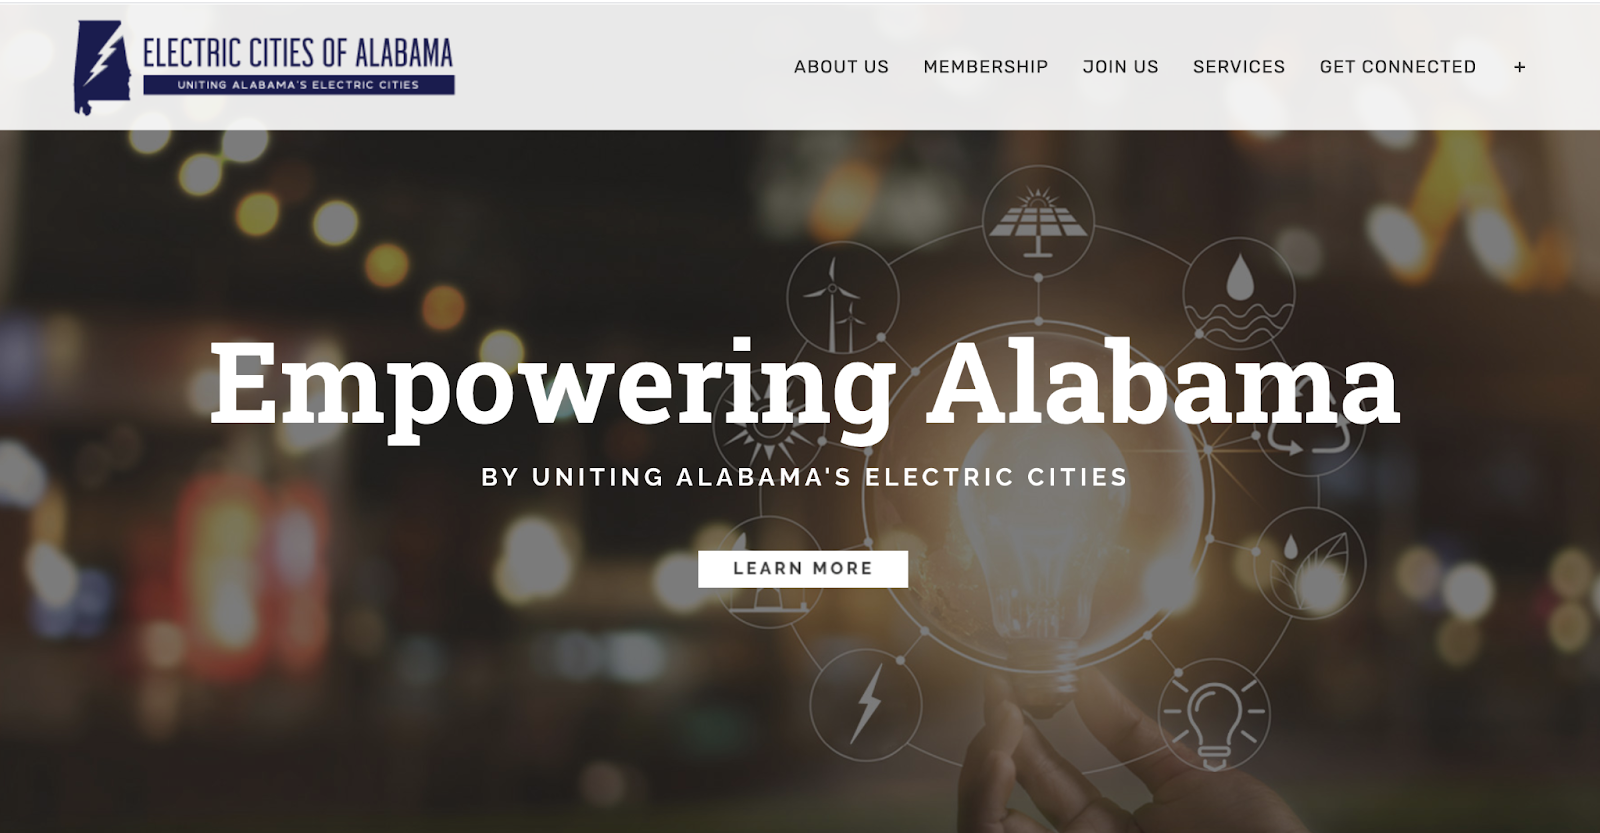 Electric Cities of Alabama homepage showing text overlaid on an evocative image of a bright lightbulb being held against city lights at night.